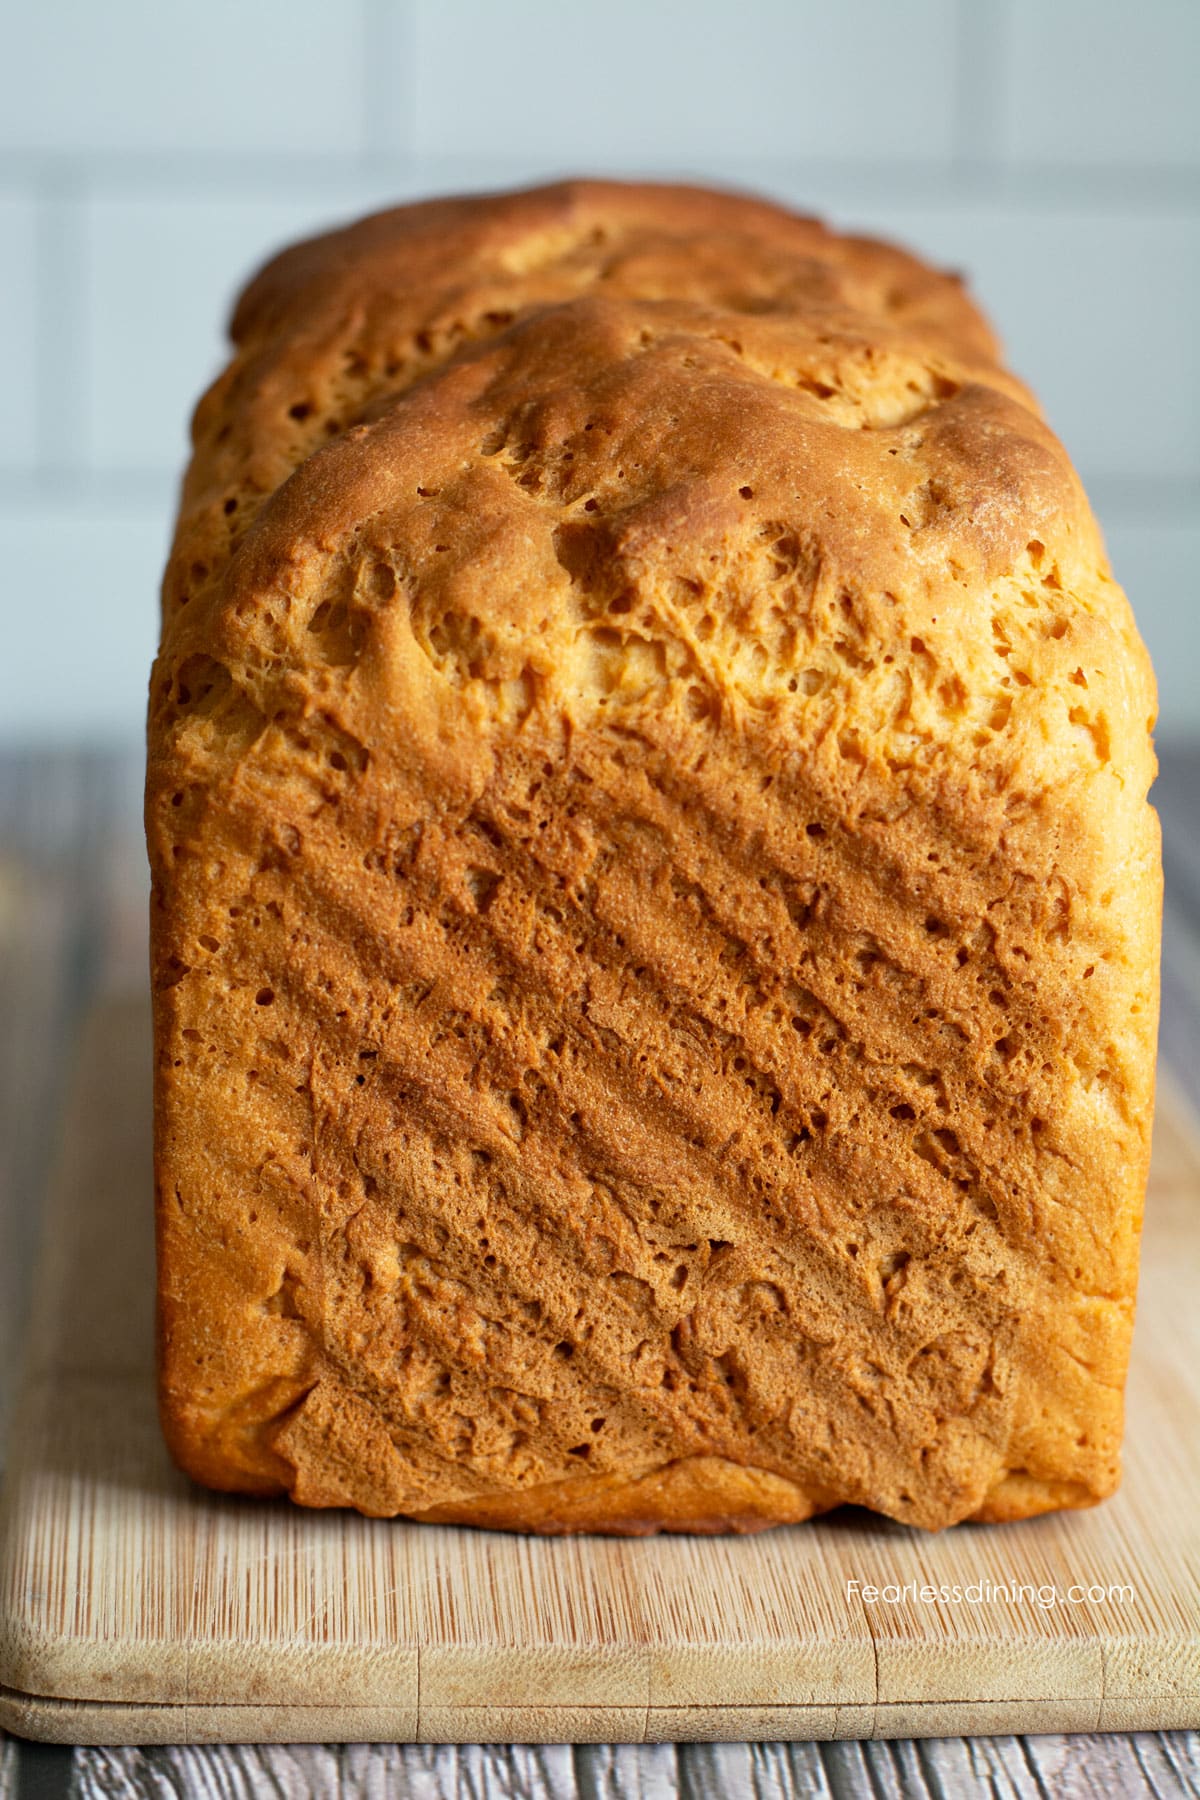 The whole loaf of the Cup4Cup tested bread.